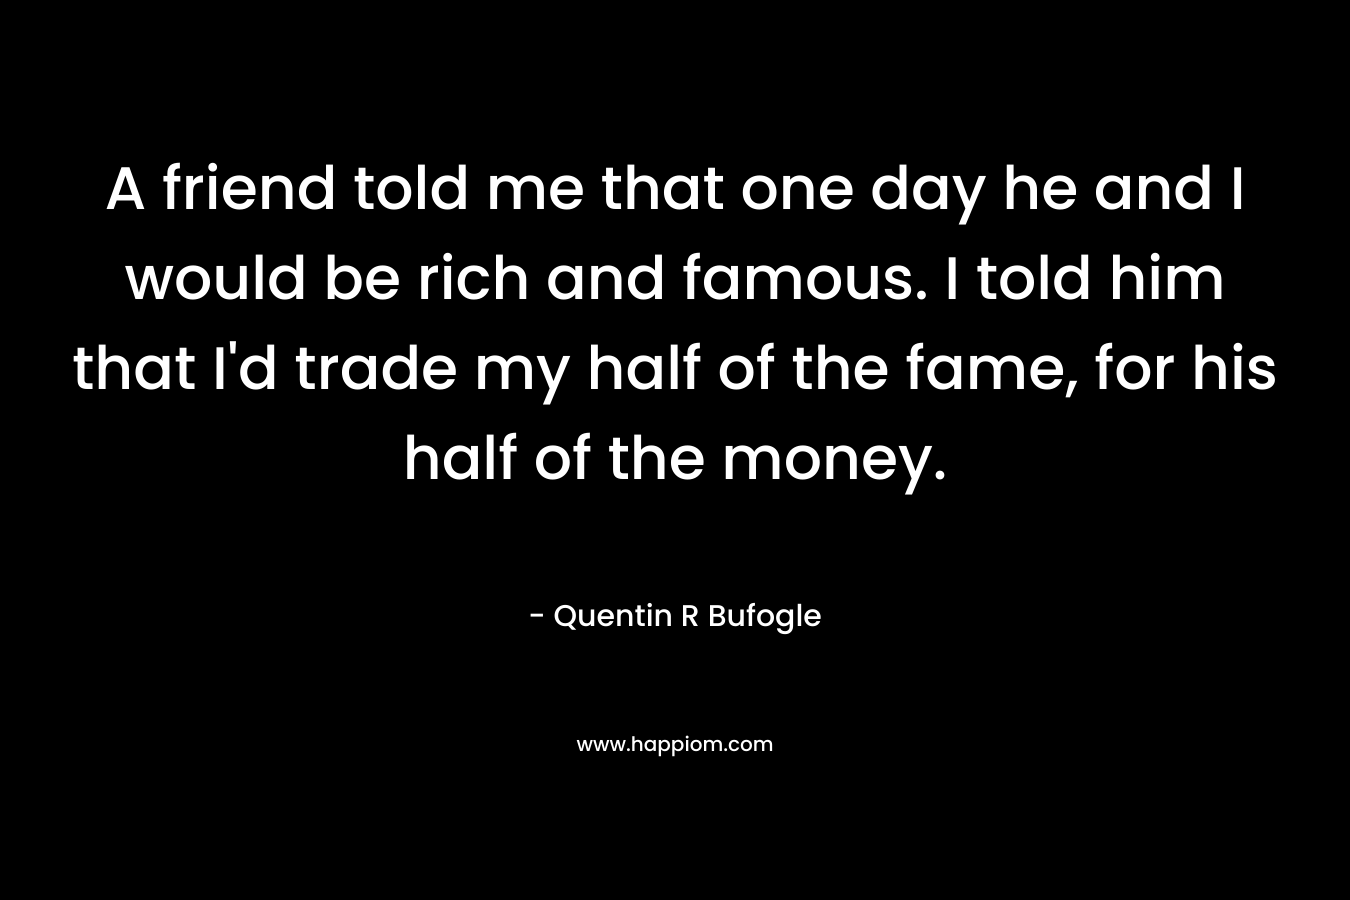 A friend told me that one day he and I would be rich and famous. I told him that I'd trade my half of the fame, for his half of the money.